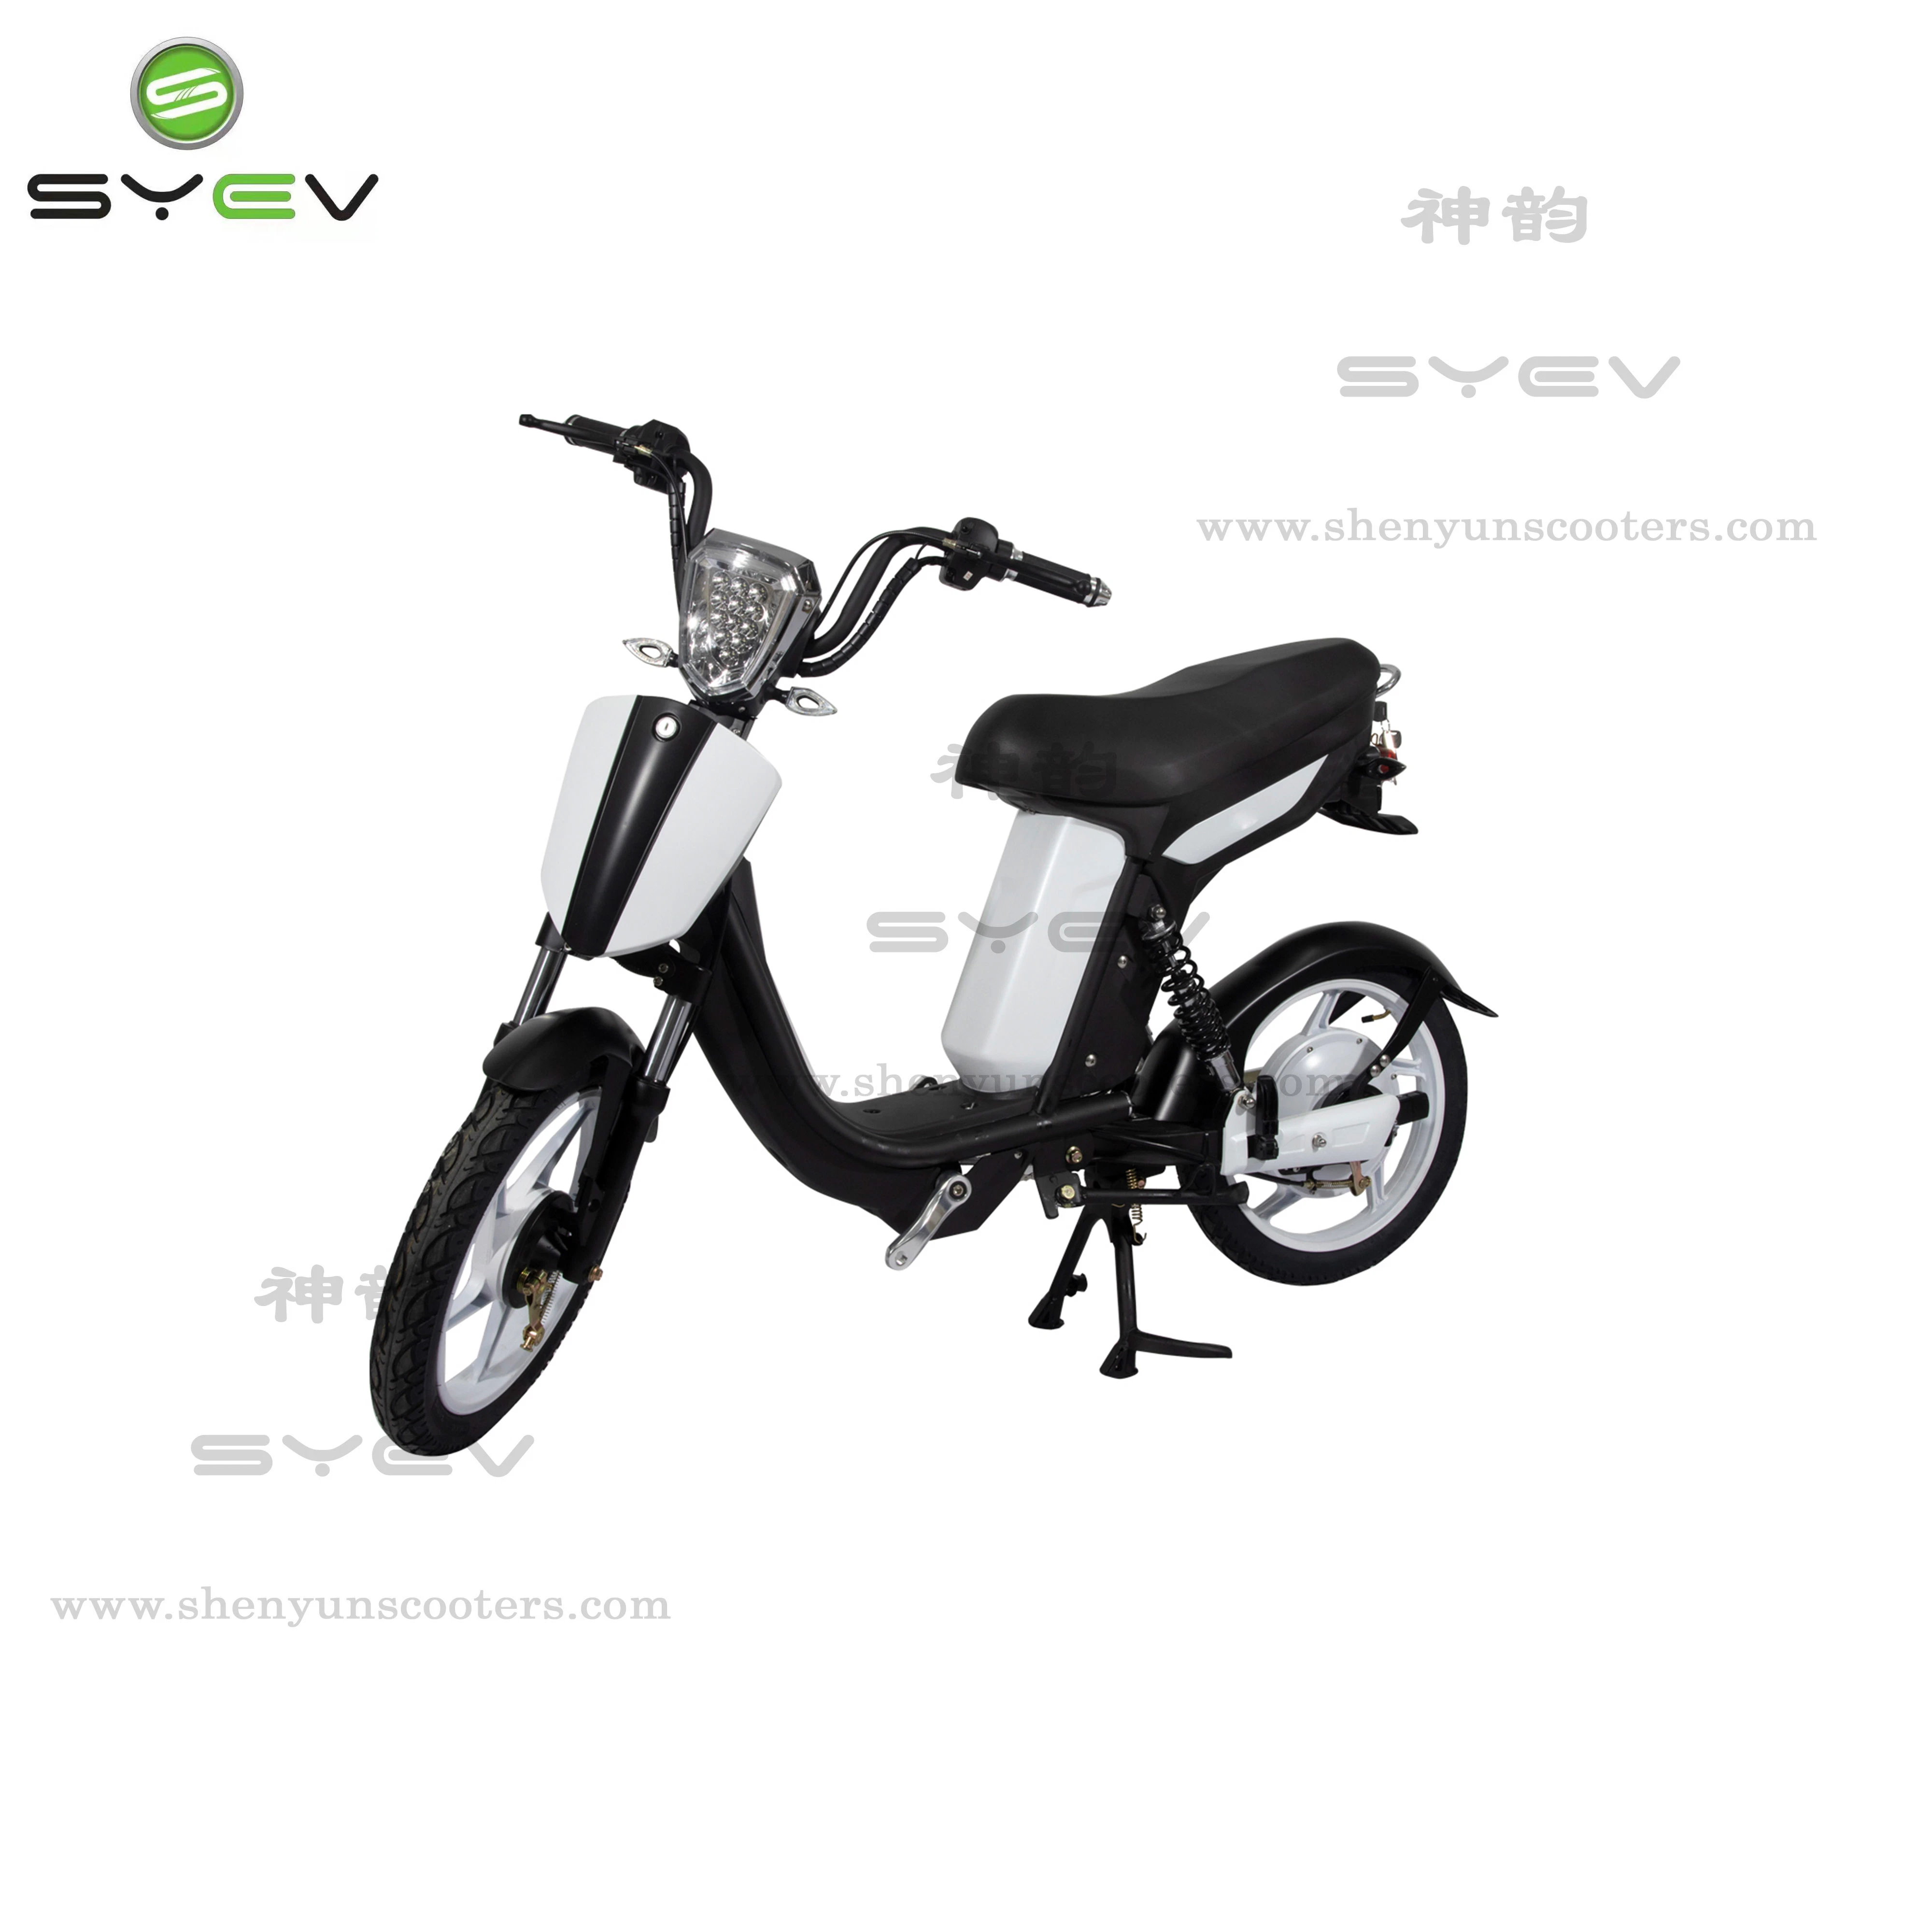 Cheap Price 350W Electric Mobility Bike High Quality E-Scooter with Portable Battery